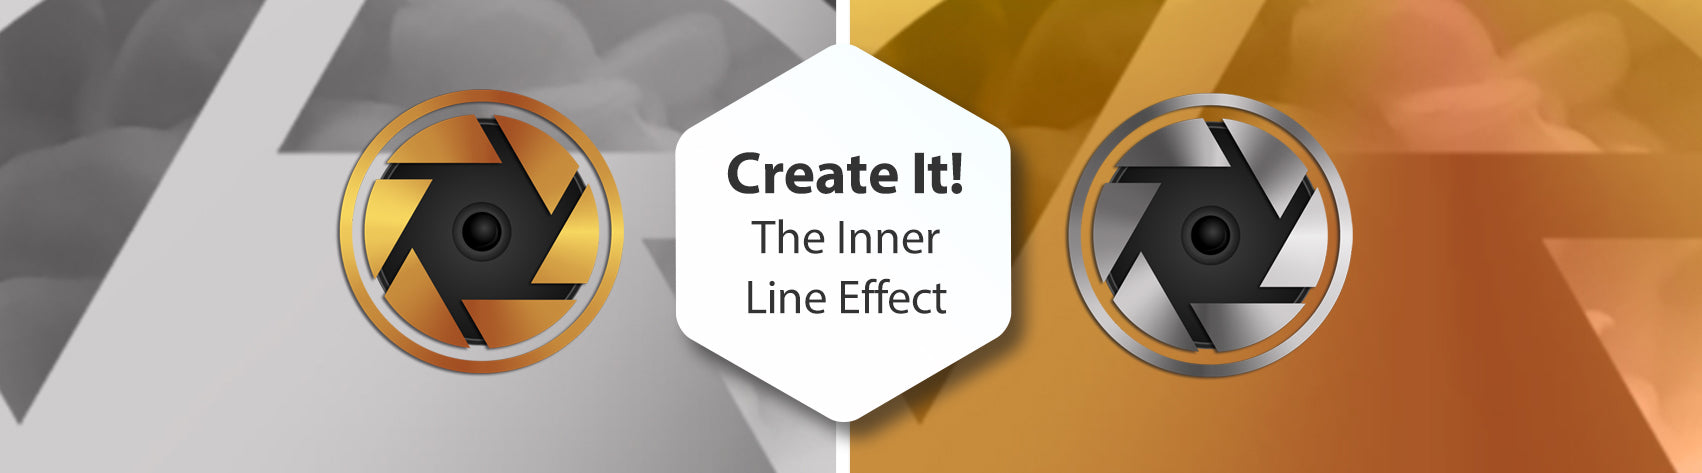 Create It! The Inner Line Effect